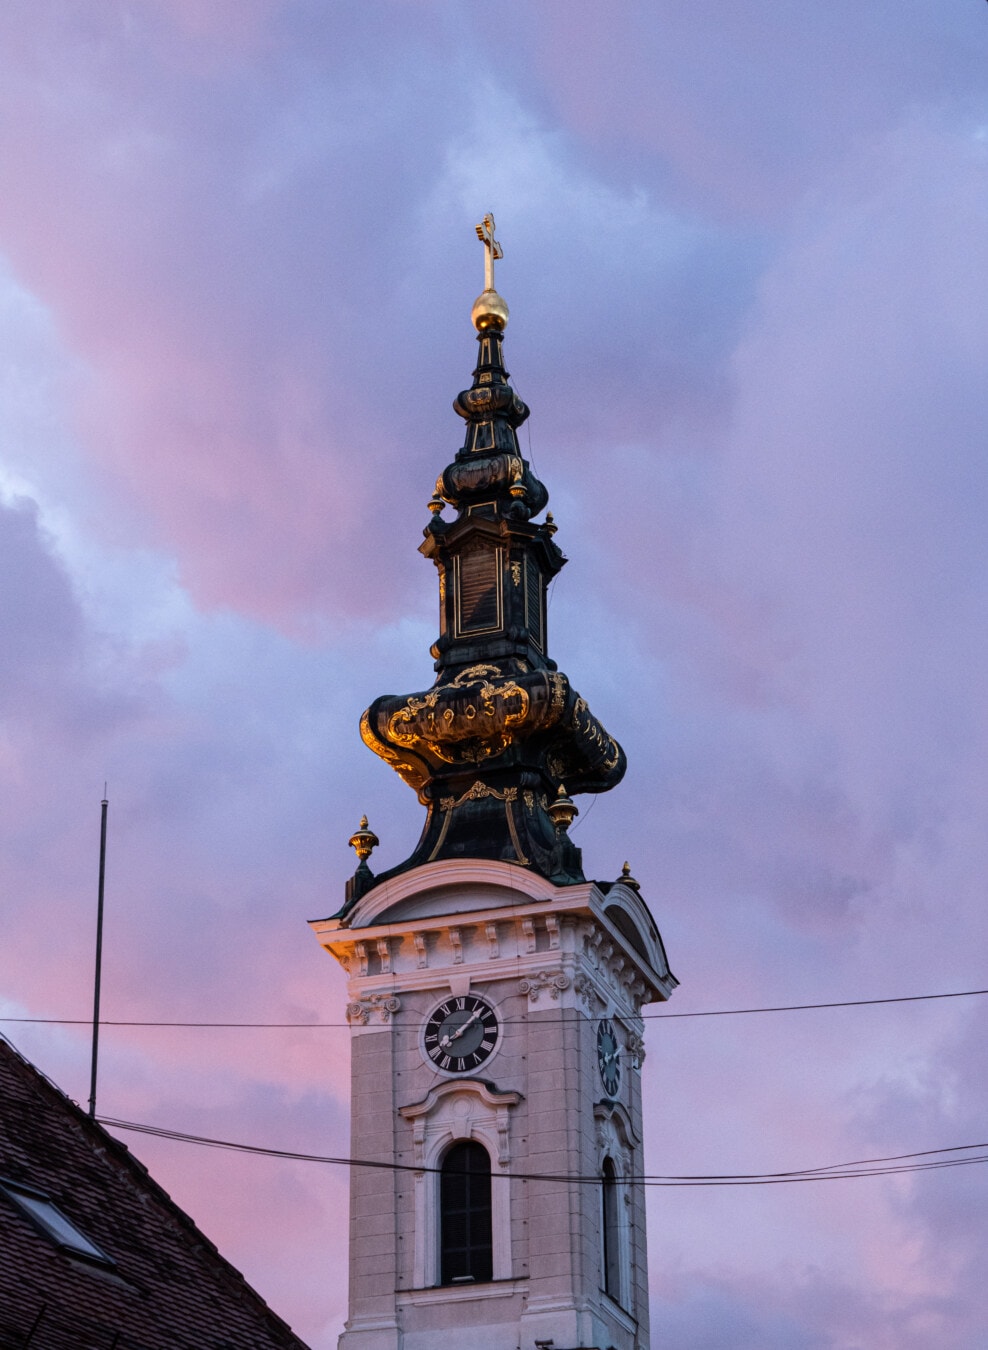 evening, church tower, golden shine, cross, architecture, tower, old, church, city, ancient